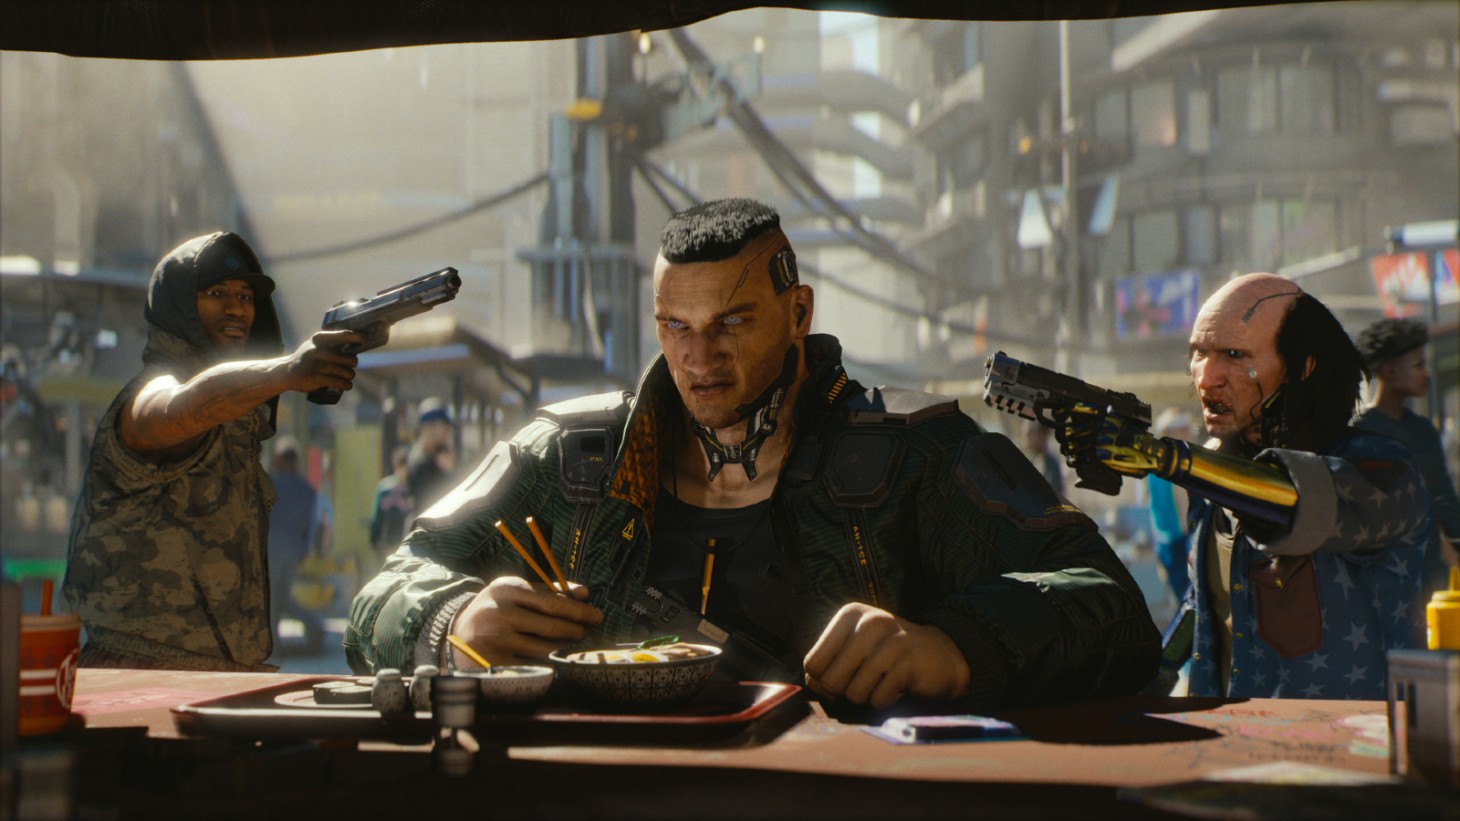 Cyberpunk 2077 is now back on the PlayStation Store! - Home of the